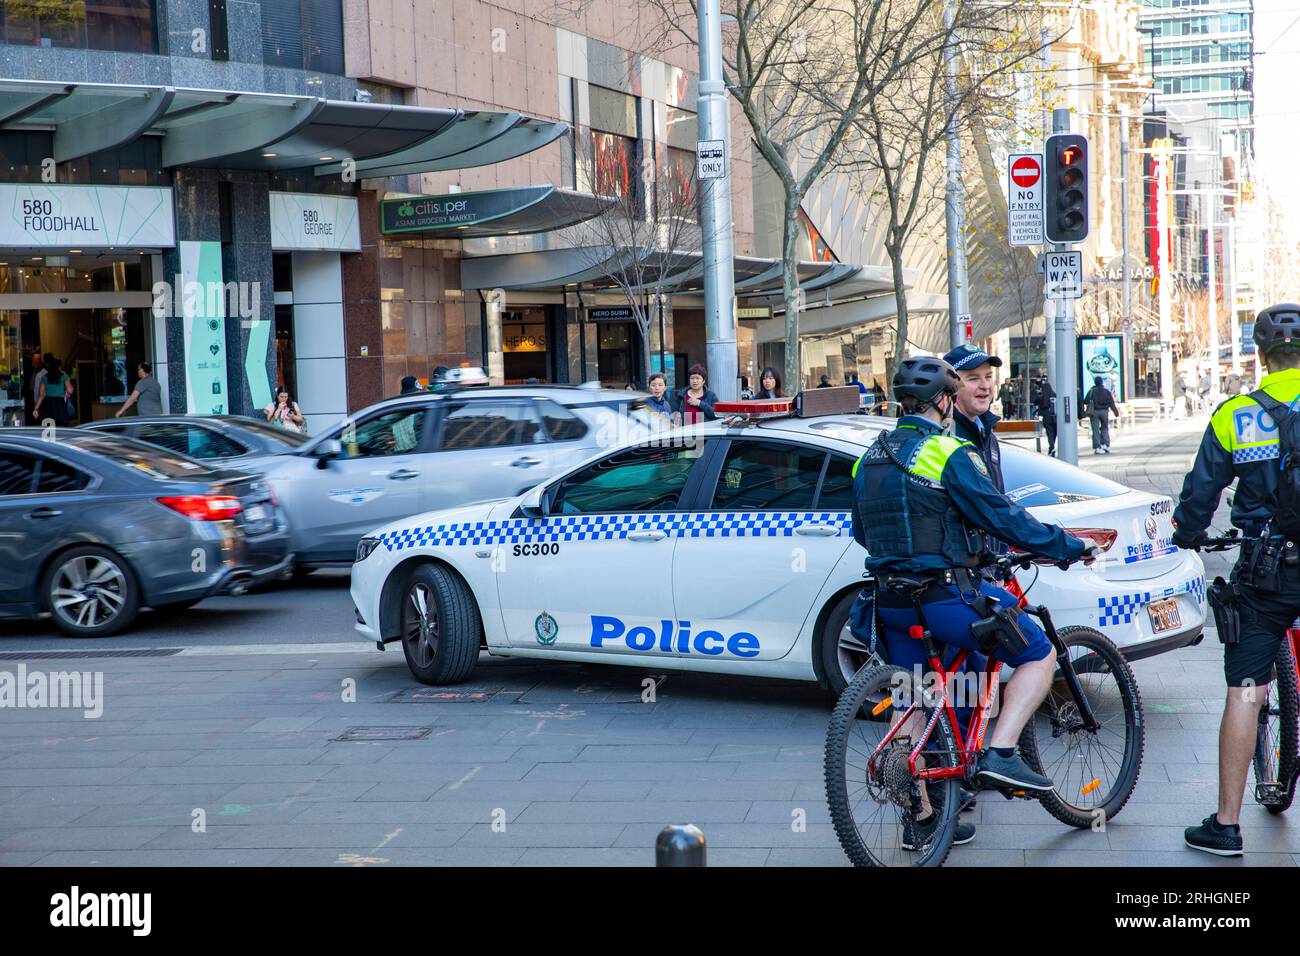 Sydney Australia New South Wales police officers and police car, police officers riding bicycles on police patrol,Australia Stock Photo